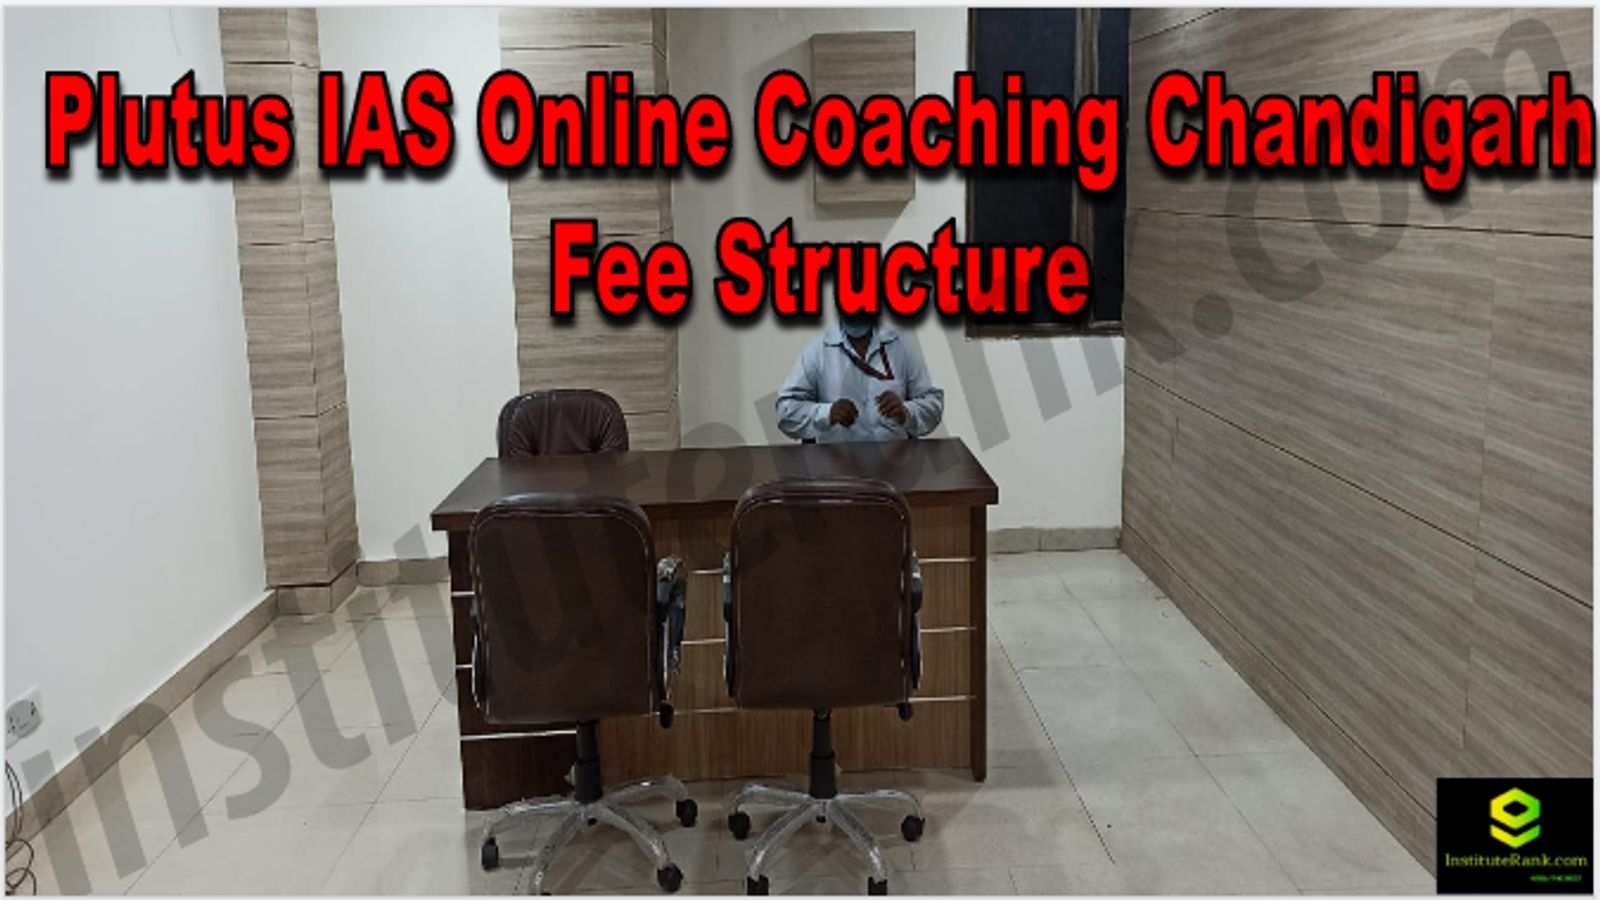 Plutus IAS Online Coaching Chandigarh Reviews Fee Structure